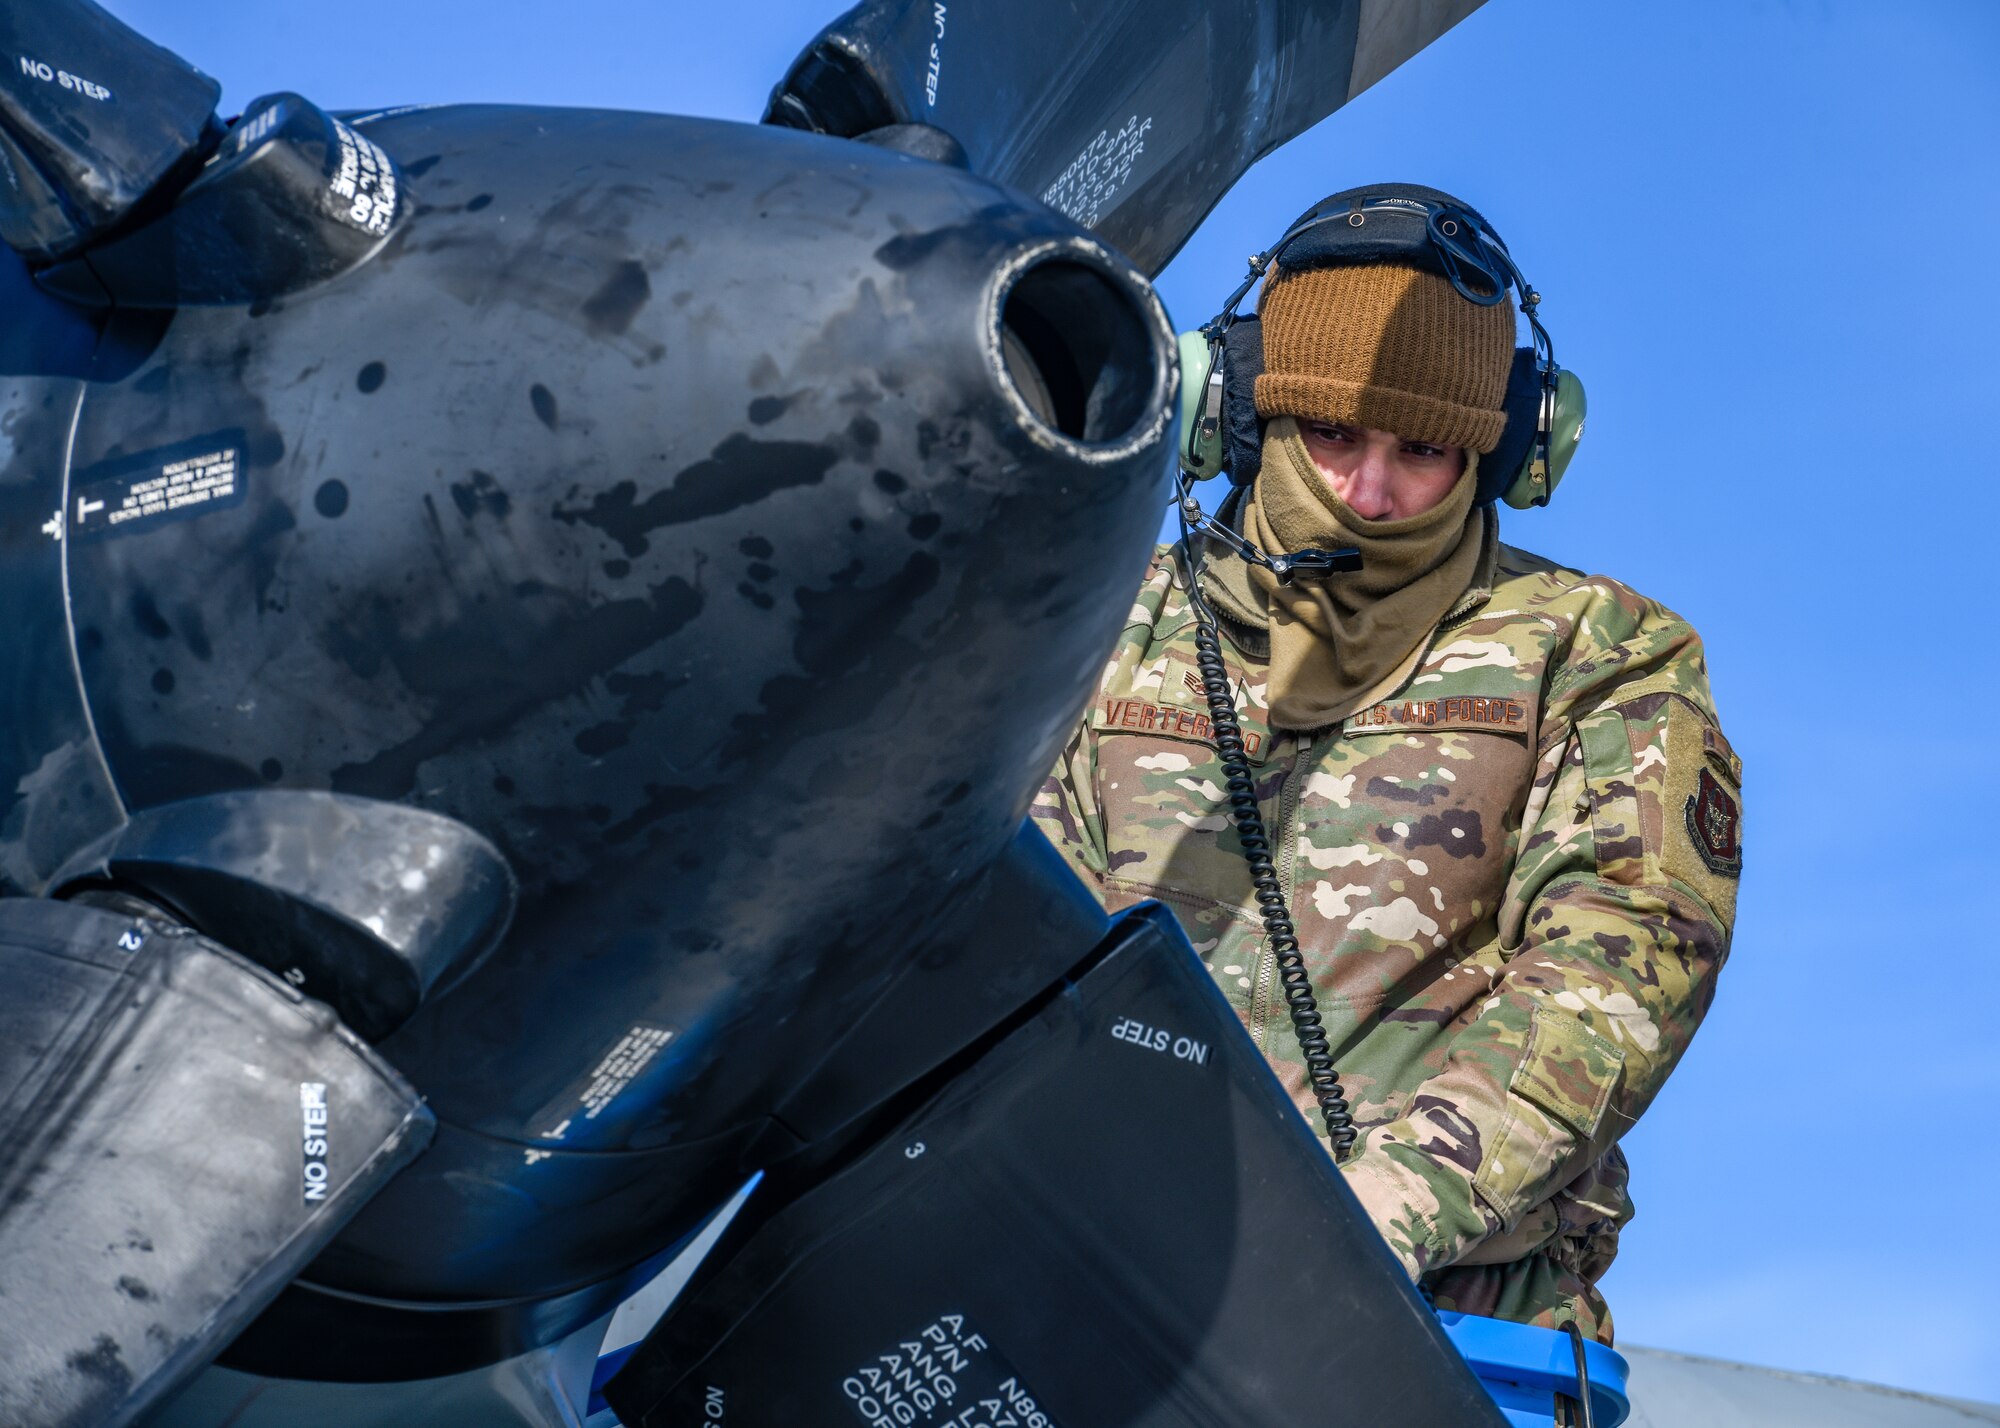 Staff Sgt. Anthony Verterano, an aerospace propulsion technician assigned to the 910th Aircraft Maintenance Squadron, confirms a propeller lock position on a 910th Airlift Wing C-130H Hercules aircraft, Jan. 17, 2023, at Mountain Home Air Force Base, Idaho.